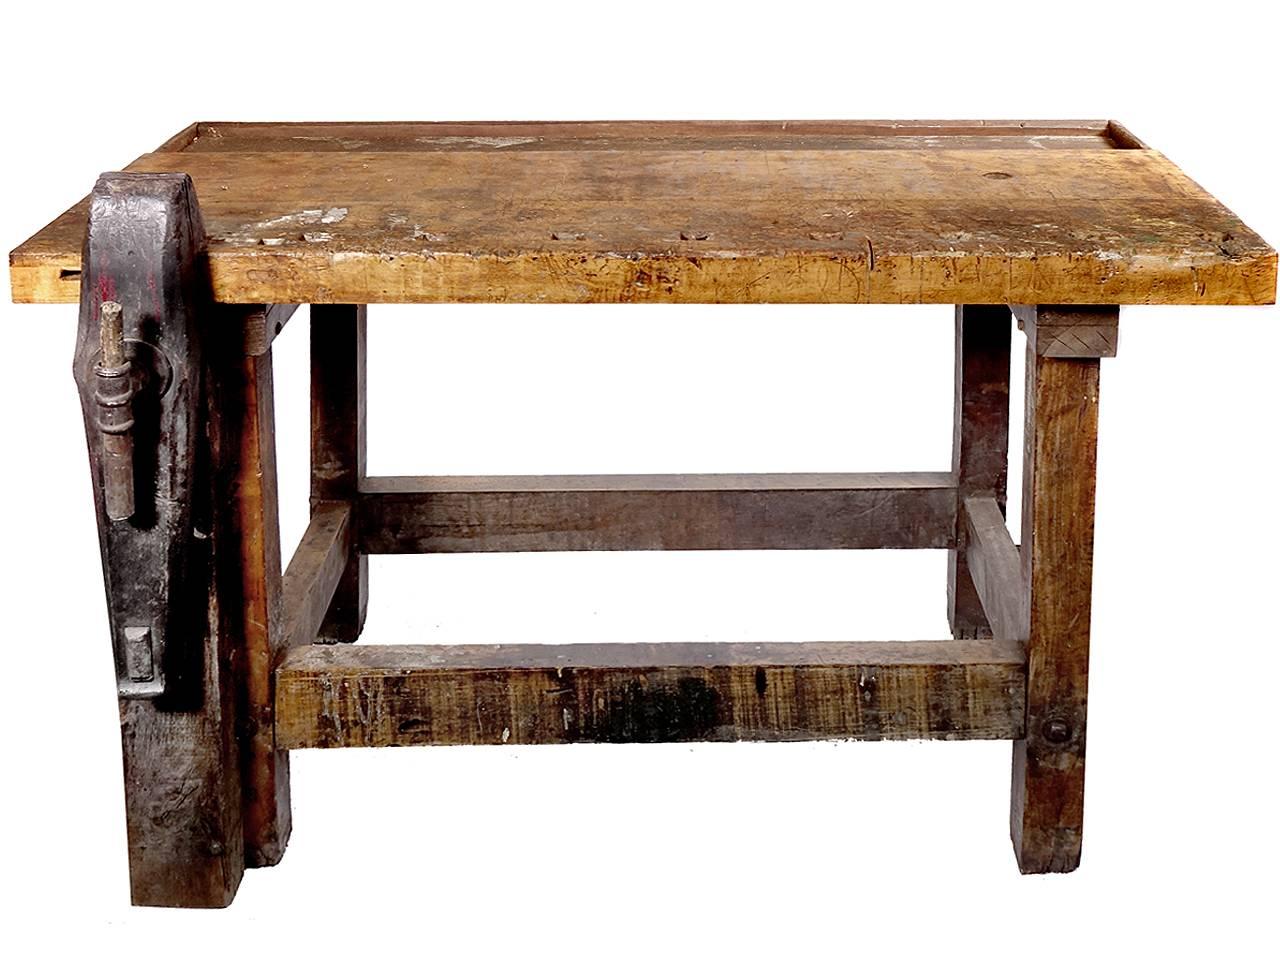 This is a nice weathered carpenter’s workbench with a rustic finish. The patina shows a well used top with 100 years of work. It has an interesting long vertical vise or clamp and square holes for bench dogs. The look and size are just right.

 